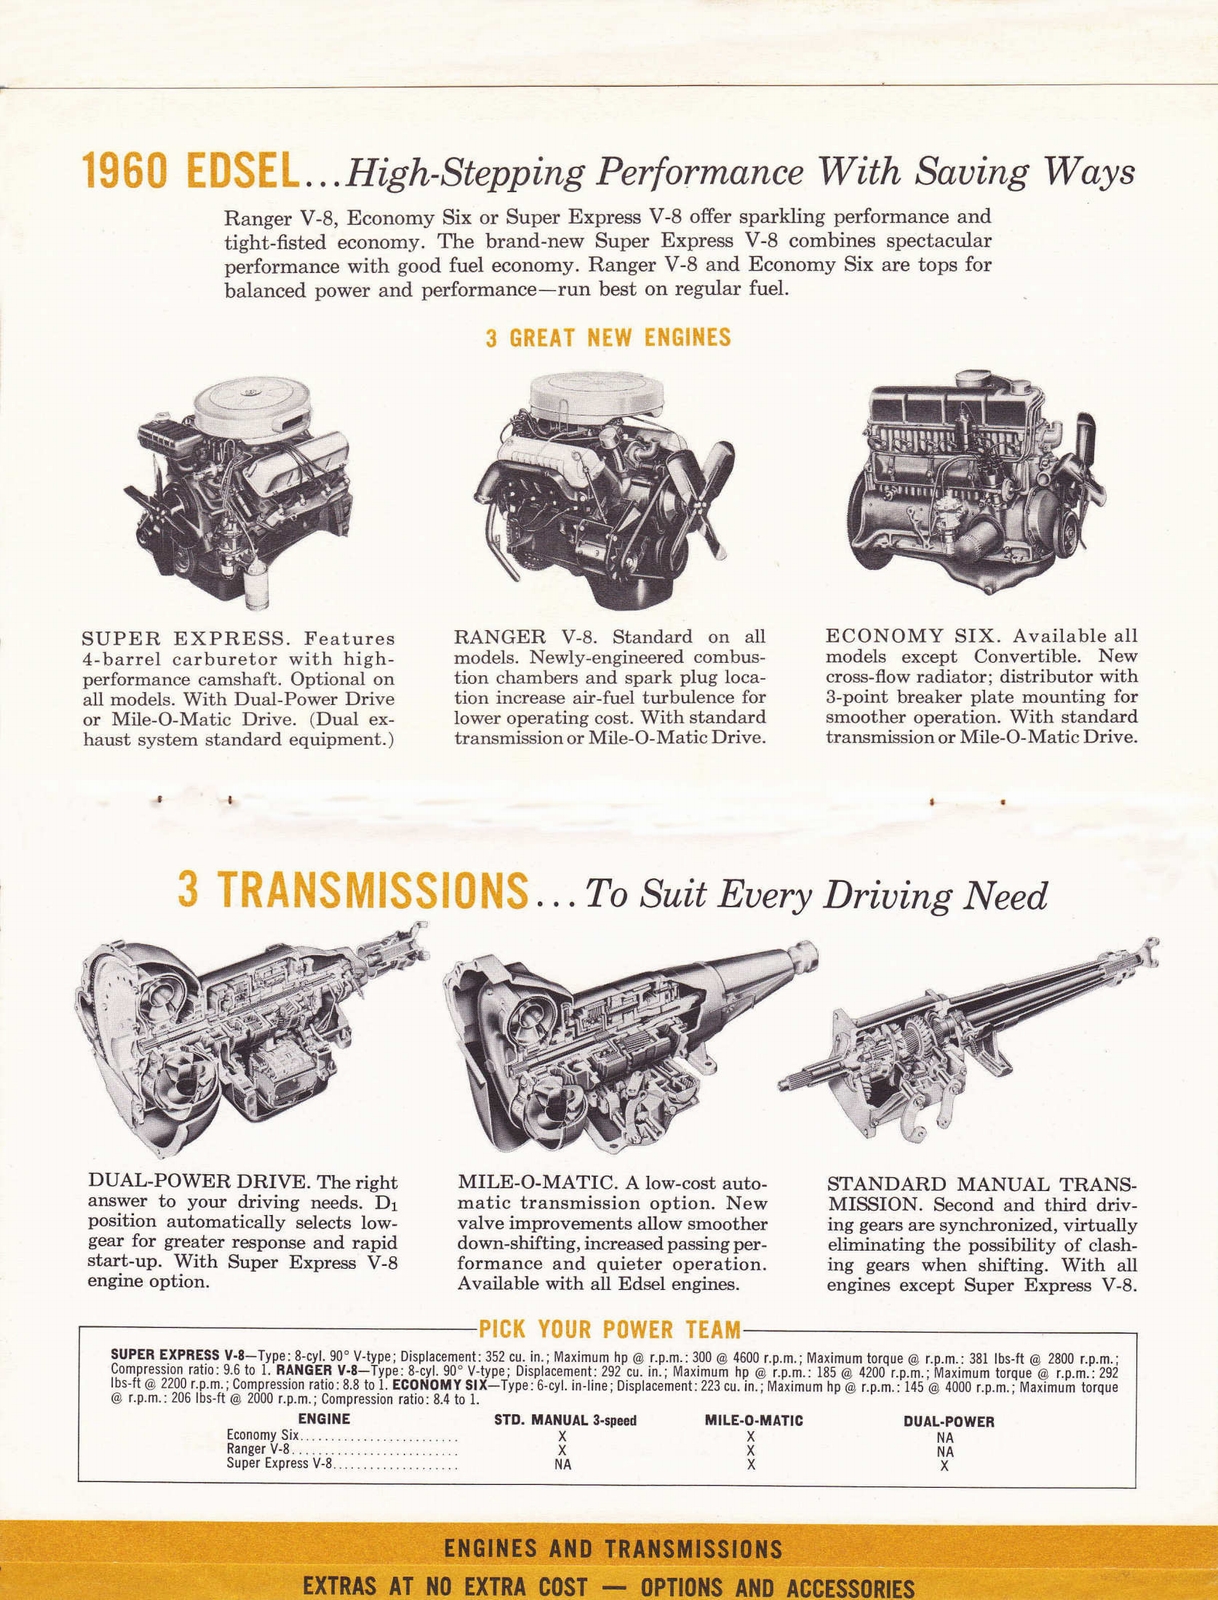 n_1960 Edsel Quick Facts Booklet-12-13.jpg